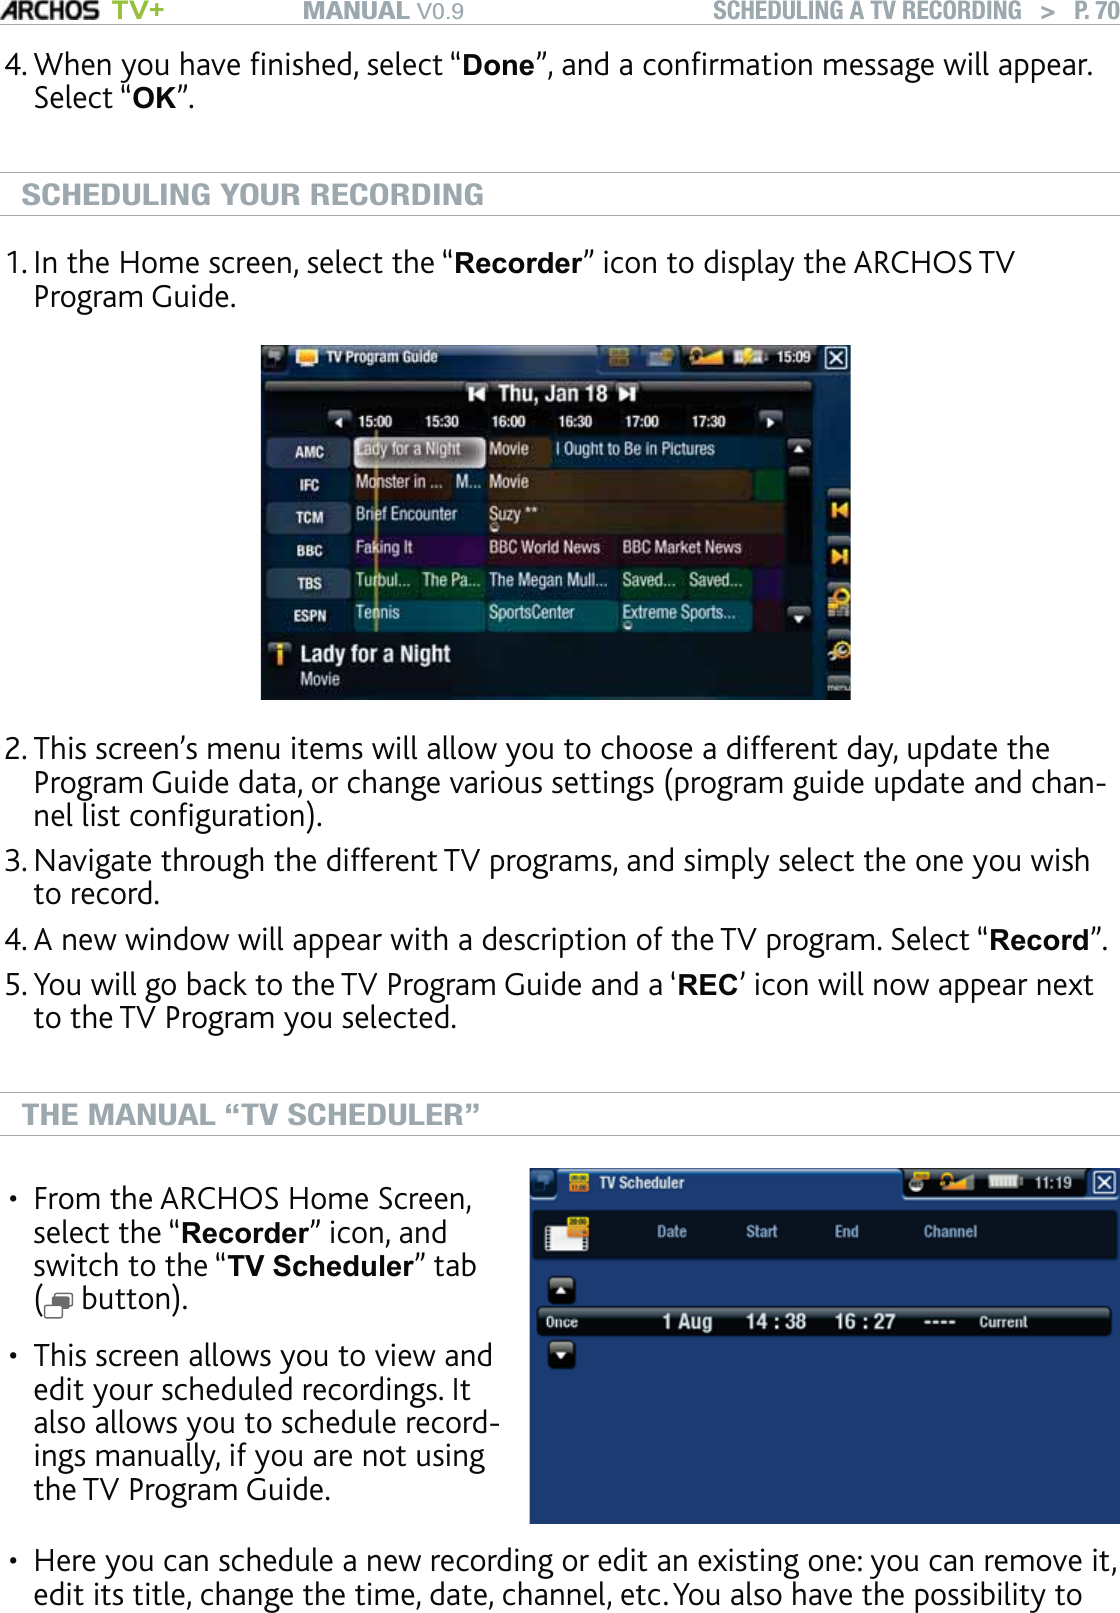 MANUAL V0.9 TV+ SCHEDULING A TV RECORDING   &gt;   P. 70When you have ﬁnished, select “Done”, and a conﬁrmation message will appear. Select “OK”. SCHEDULING YOUR RECORDINGIn the Home screen, select the “Recorder” icon to display the ARCHOS TV Program Guide. This screen’s menu items will allow you to choose a different day, update the Program Guide data, or change various settings (program guide update and chan-nel list conﬁguration).Navigate through the different TV programs, and simply select the one you wish to record. A new window will appear with a description of the TV program. Select “Record”.You will go back to the TV Program Guide and a ‘REC’ icon will now appear next to the TV Program you selected. THE MANUAL “TV SCHEDULER”From the ARCHOS Home Screen, select the “Recorder” icon, and switch to the “TV Scheduler” tab  ( button).This screen allows you to view and edit your scheduled recordings. It also allows you to schedule record-ings manually, if you are not using the TV Program Guide.••Here you can schedule a new recording or edit an existing one: you can remove it, edit its title, change the time, date, channel, etc. You also have the possibility to 4.1.2.3.4.5.•